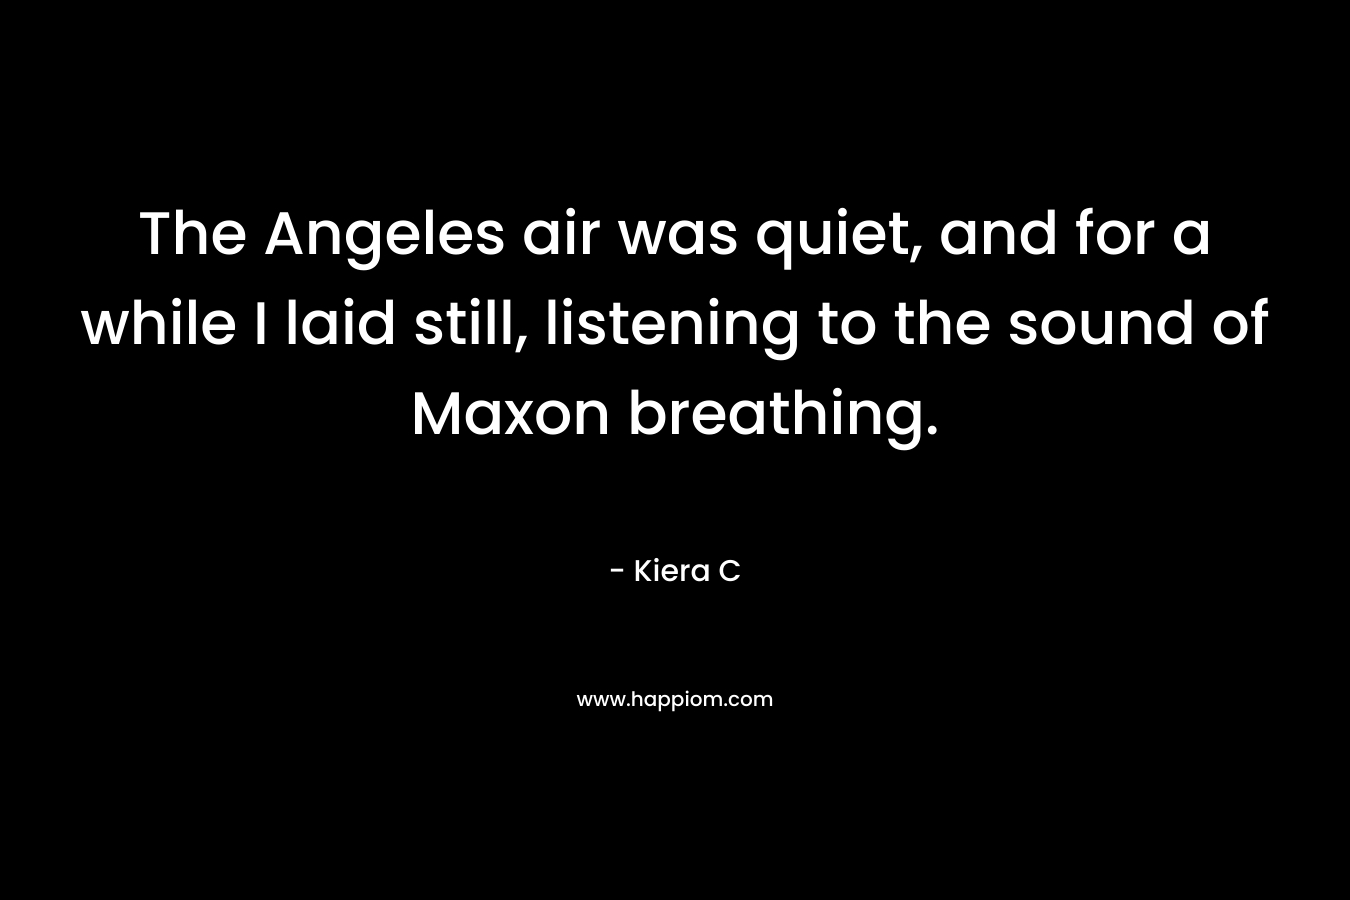 The Angeles air was quiet, and for a while I laid still, listening to the sound of Maxon breathing. – Kiera C